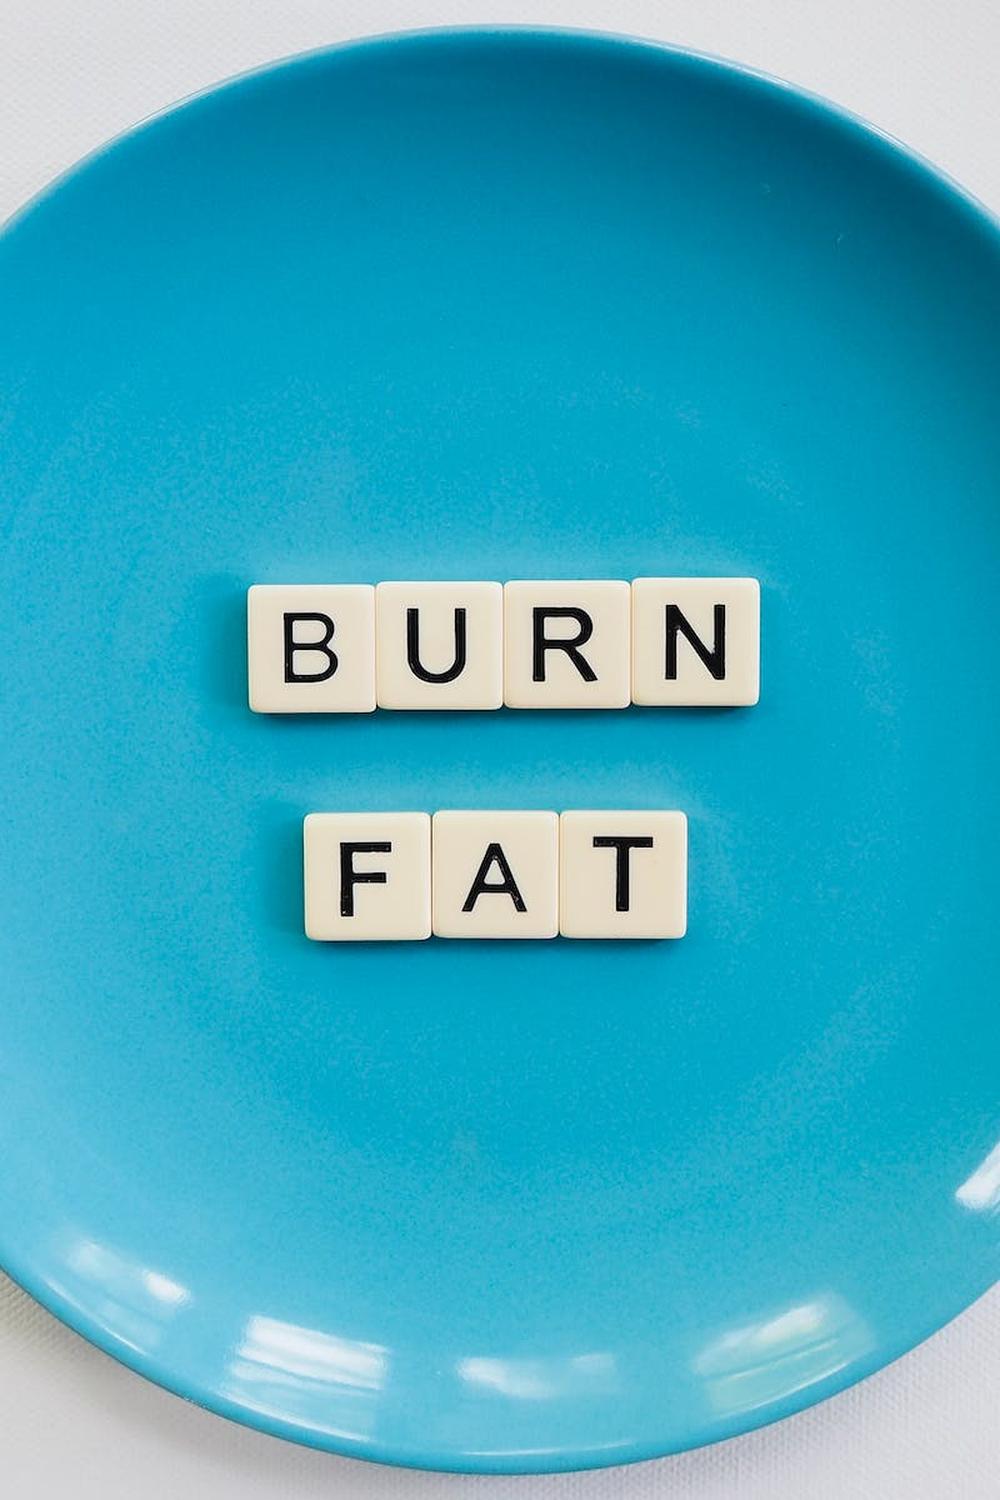 photo_of_a_burn_fat_text_on_round_blue_plate